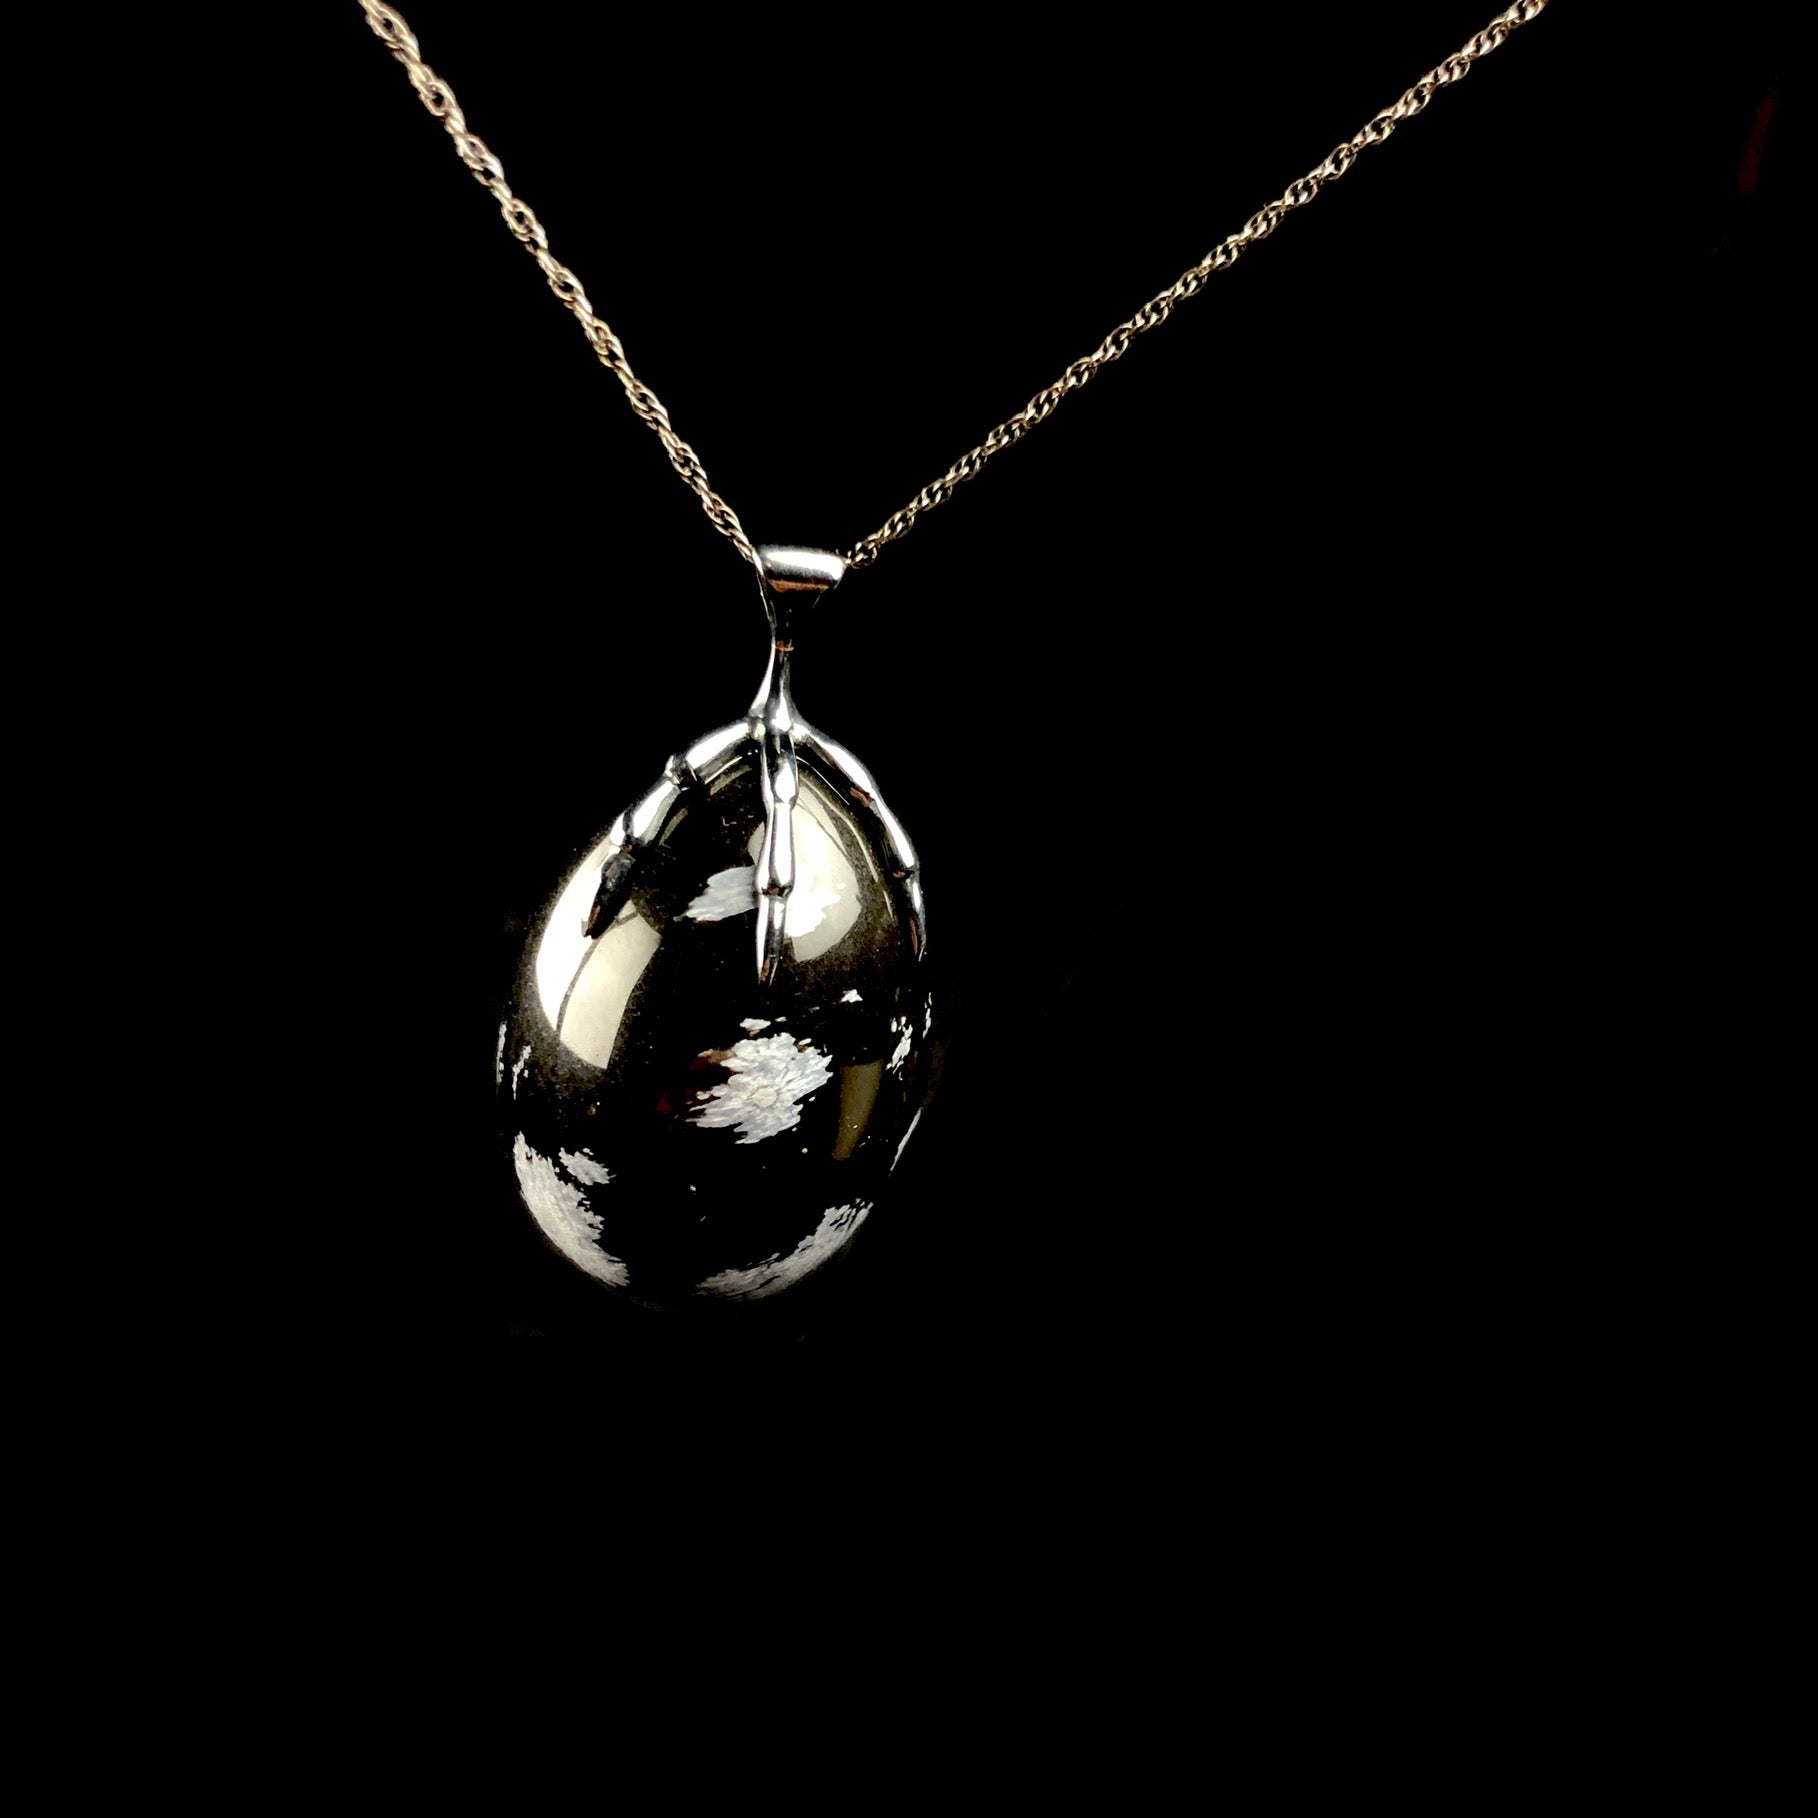 Black Egg Shaped stone held by a bird claw on black chain